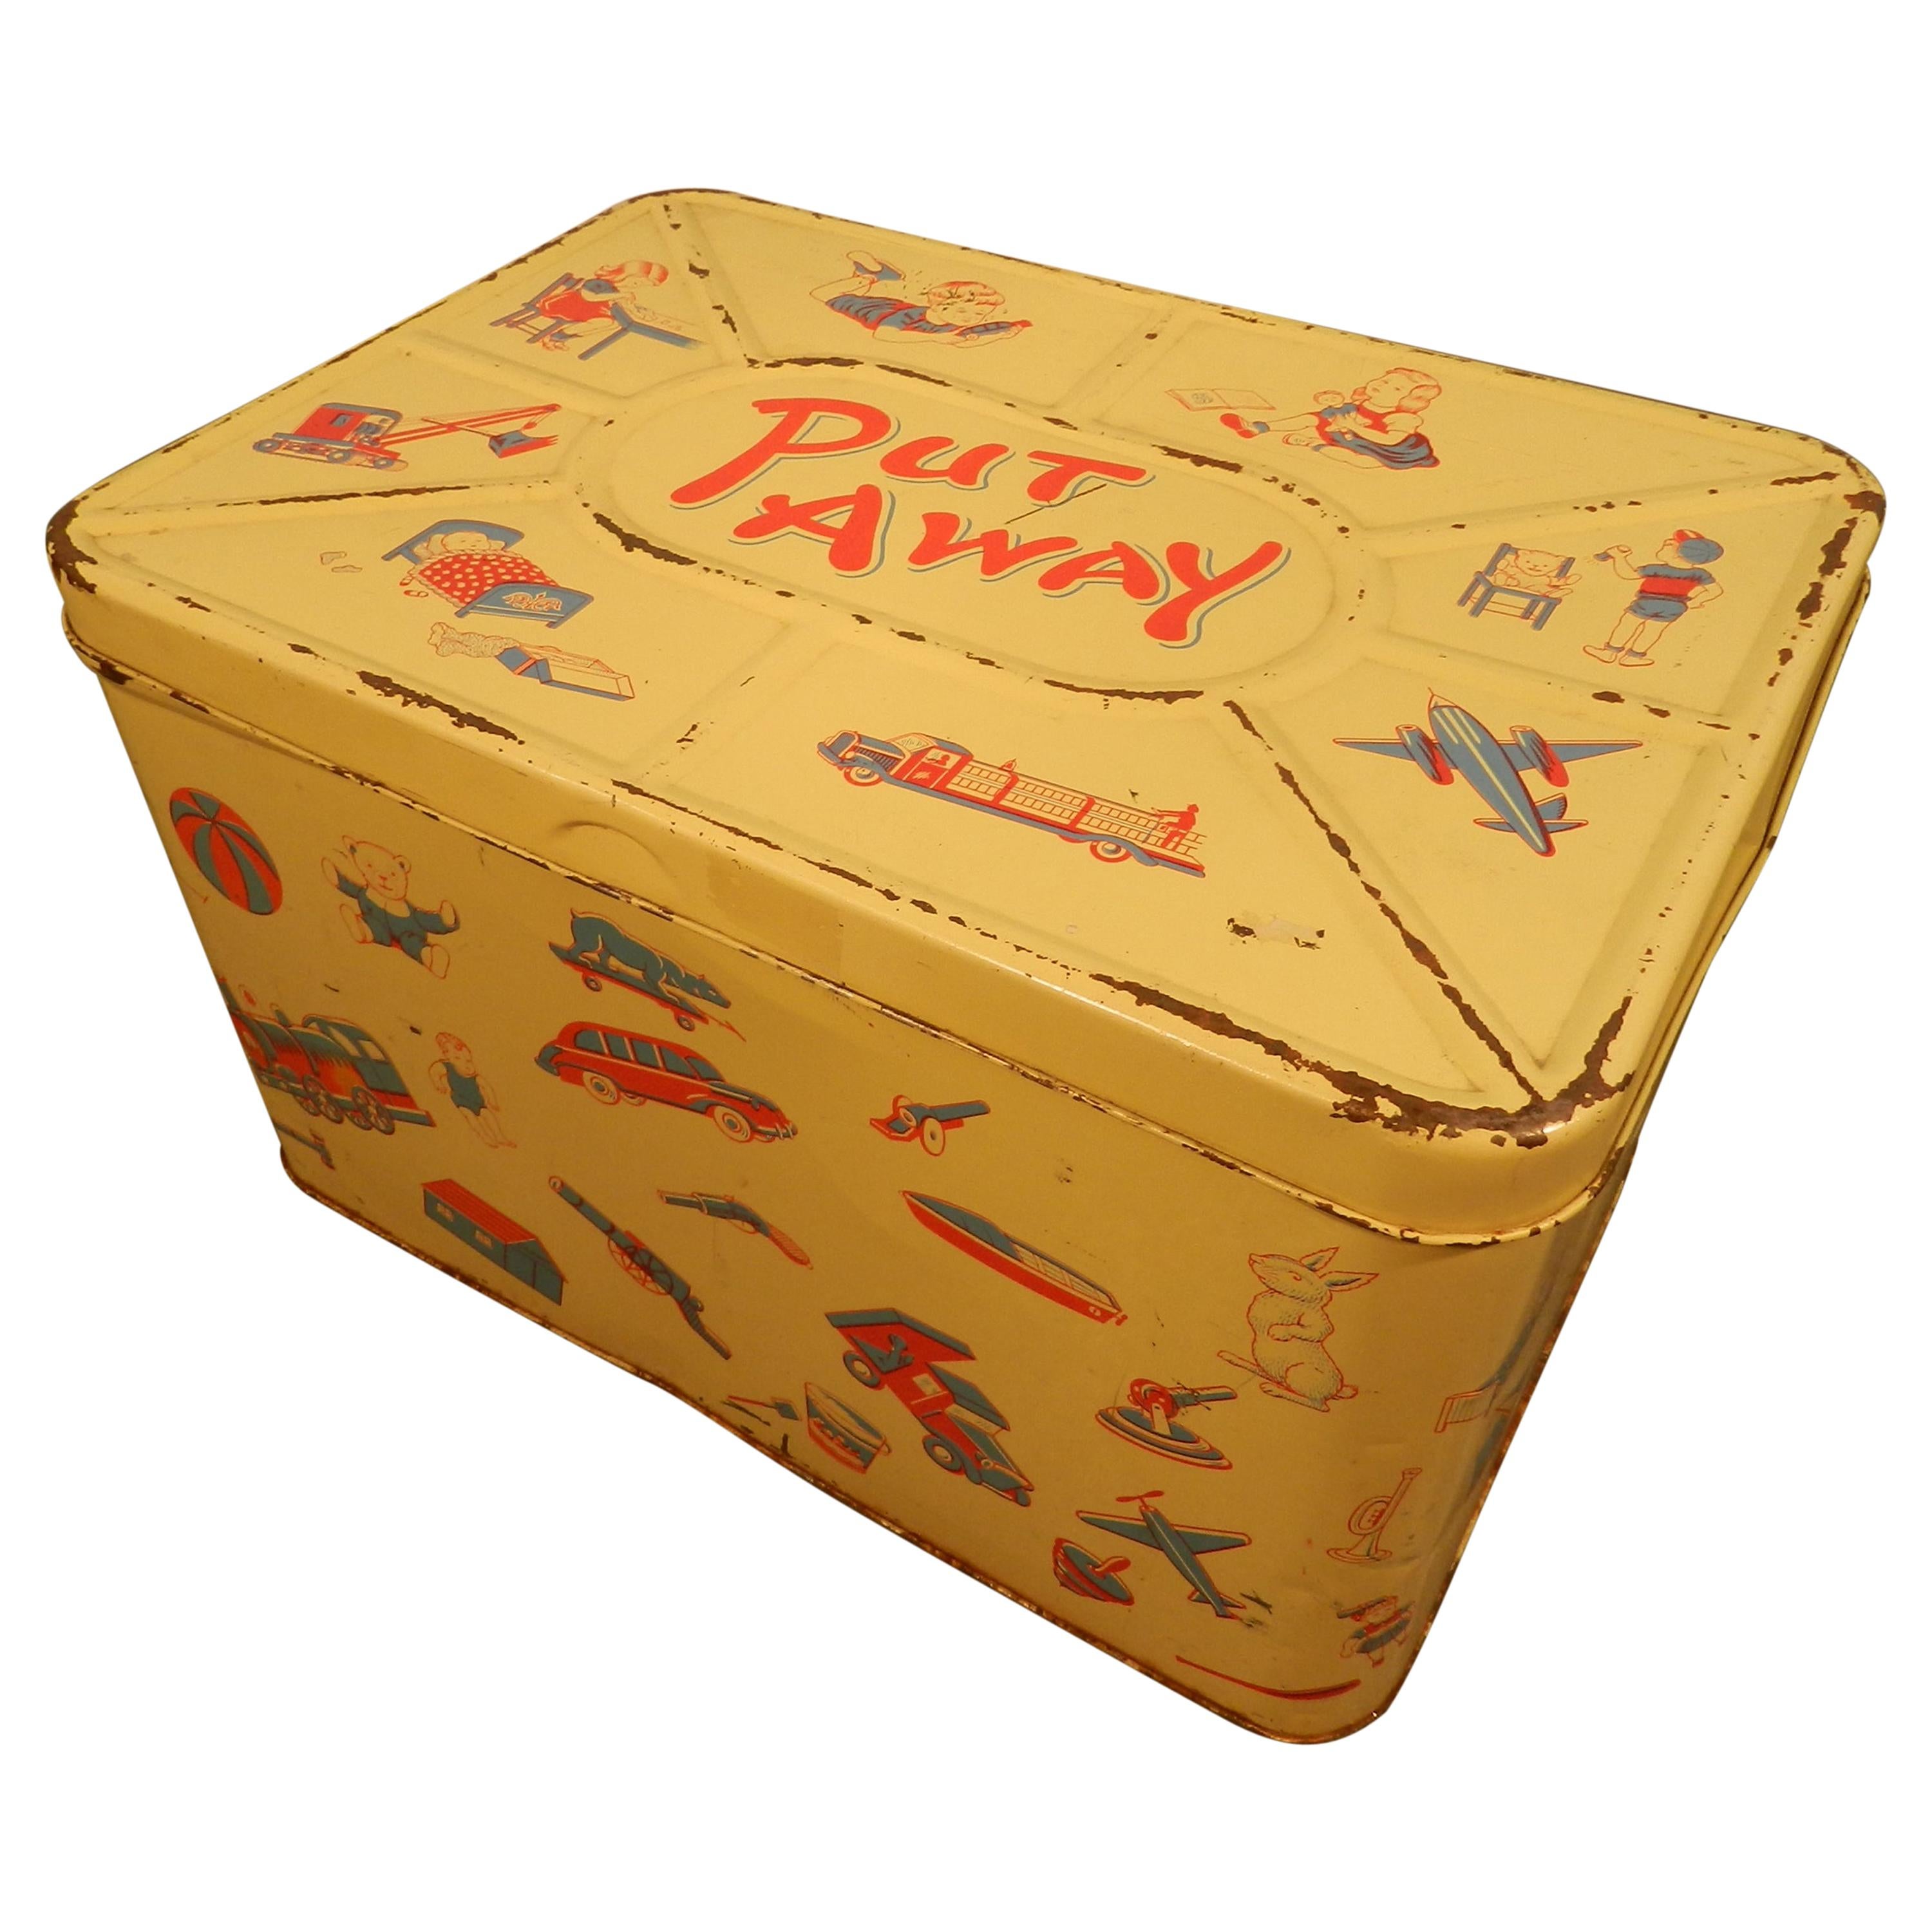 Putaway, Vintage Toy Chest in Lacquered Metal, circa 1960 For Sale